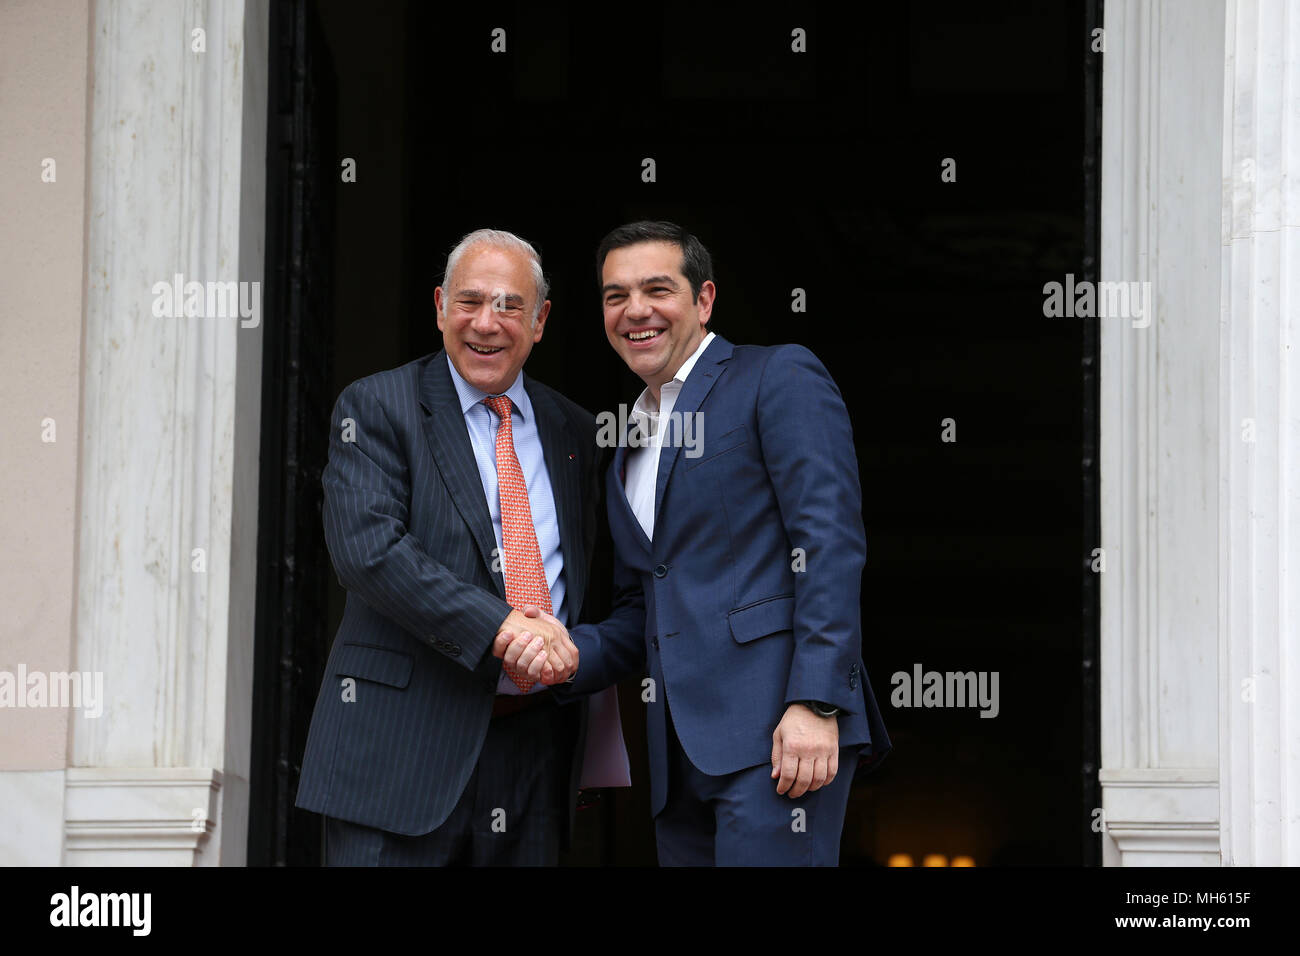 (180430) -- ATHENS, April 30, 2018 (Xinhua) -- Greek Prime Minister Alexis Tsipras (R) welcomes Secretary-General of the Organization for Economic Cooperation and Development (OECD) Angel Gurria at the Prime Minister office in Athens, Greece, on April 30, 2018. The time has come for further Greek debt relief, Angel Gurria said here on Monday after meeting with Alexis Tsipras. (Xinhua/Marios Lolos) Stock Photo